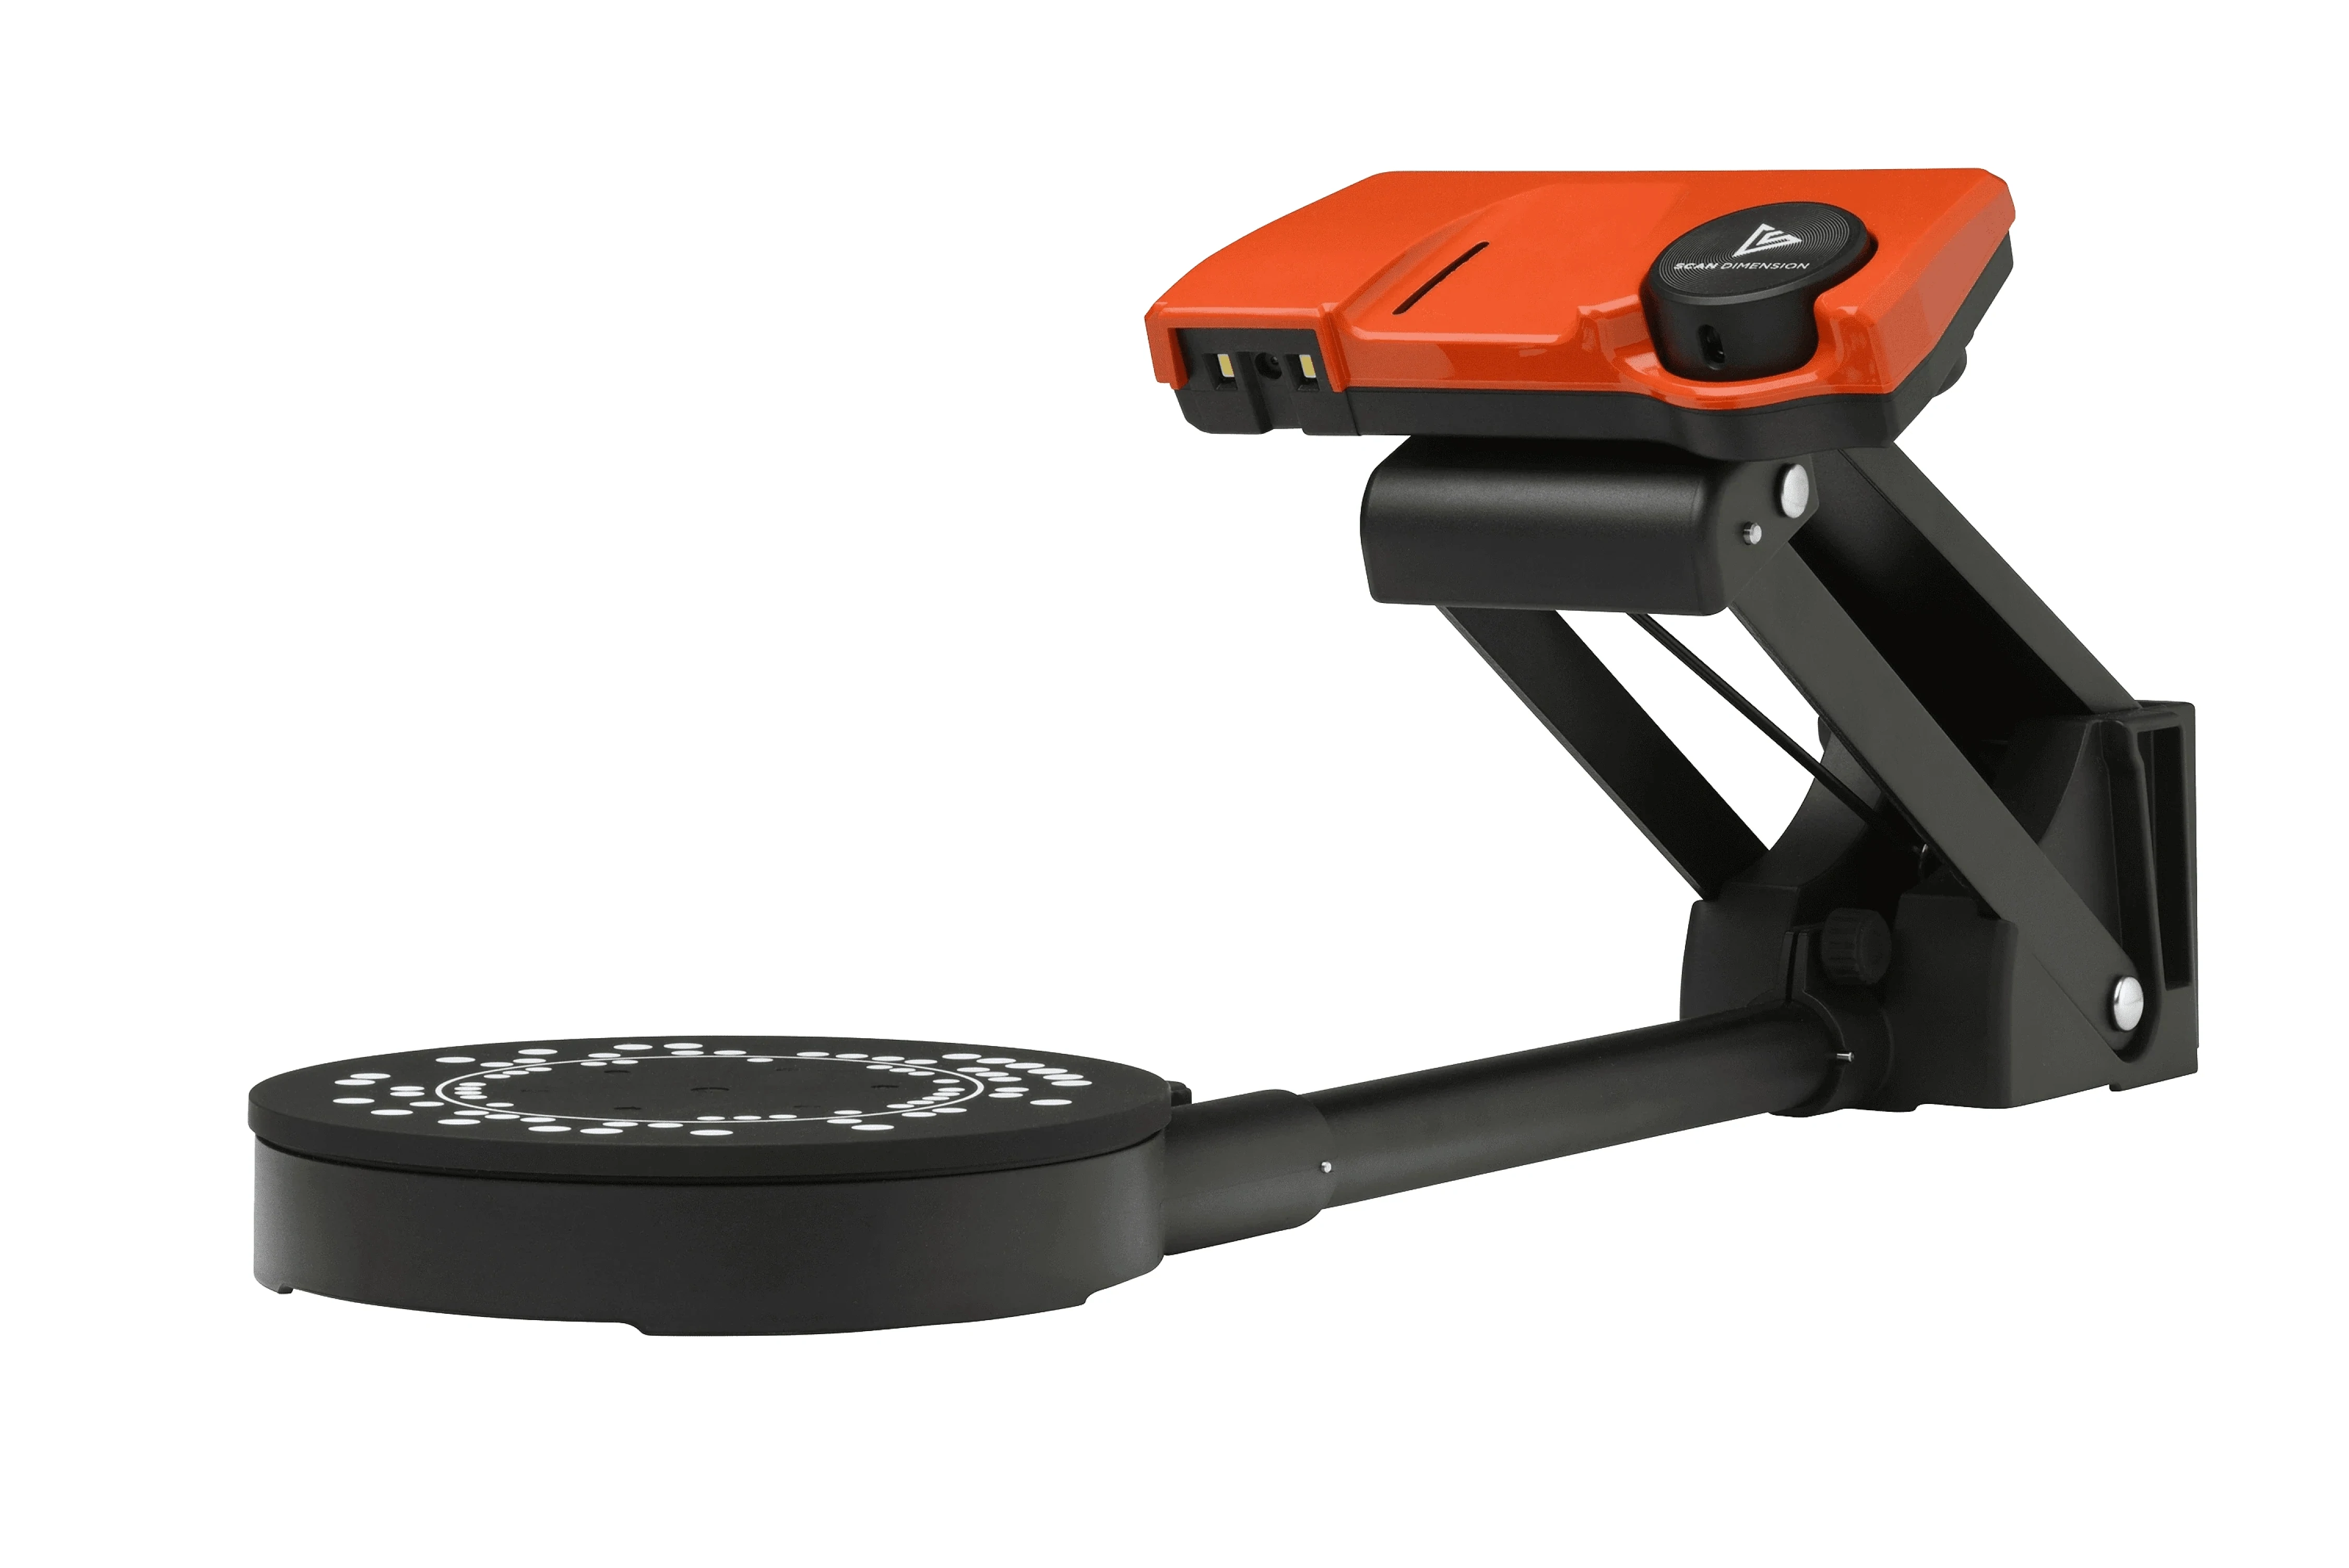 SOL PRO 3D inspection scanner by Scan Dimension